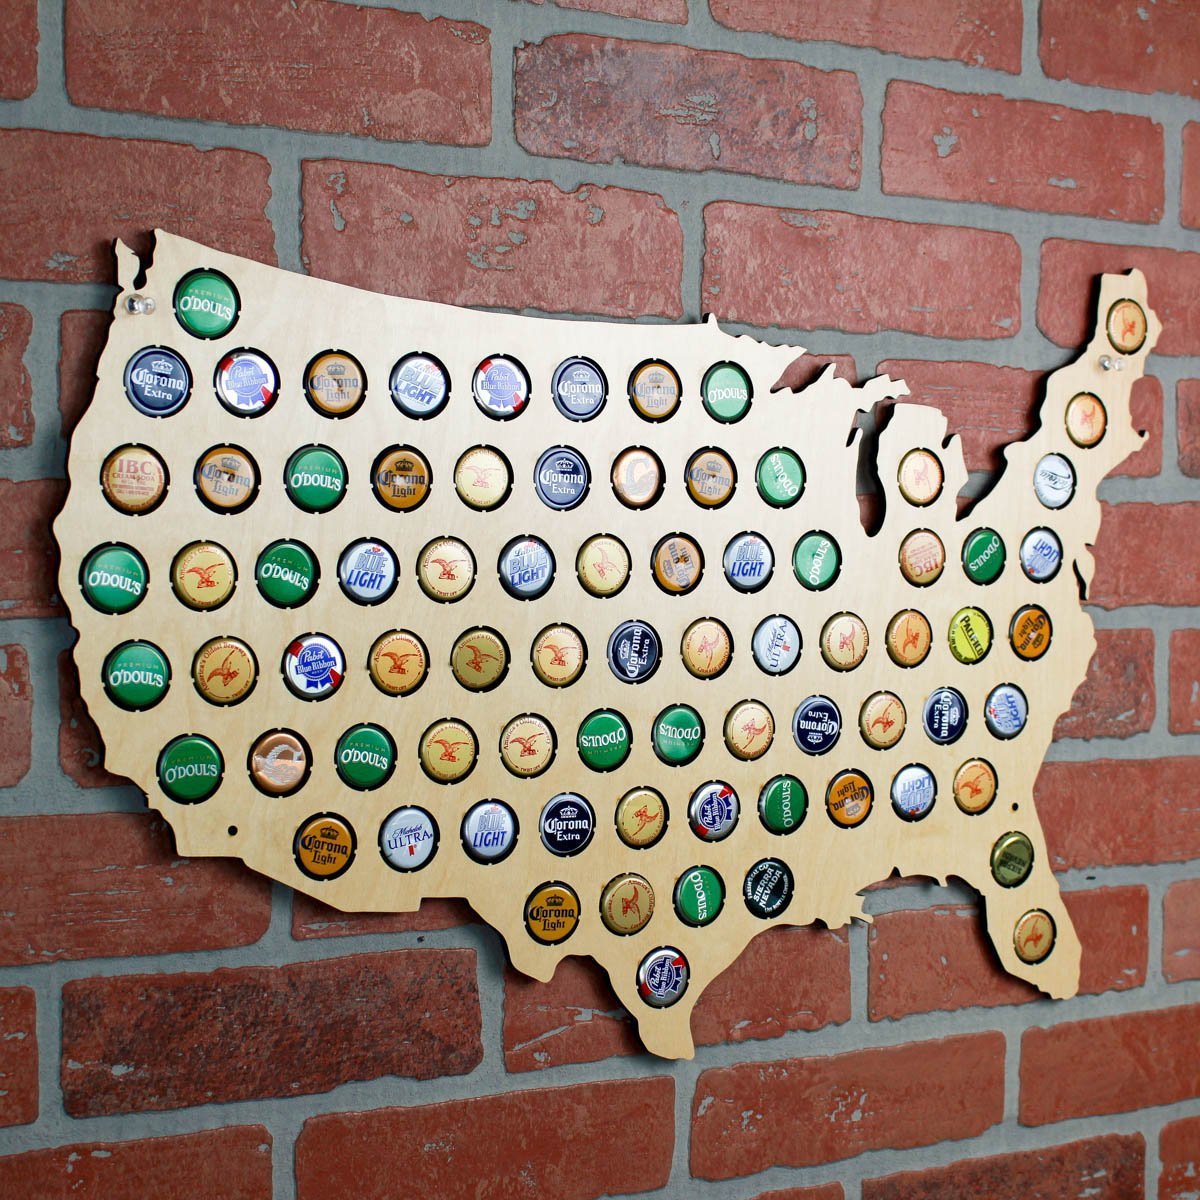 Torched Products Beer Cap Maps Regular USA Beer Cap Map (777437839477)